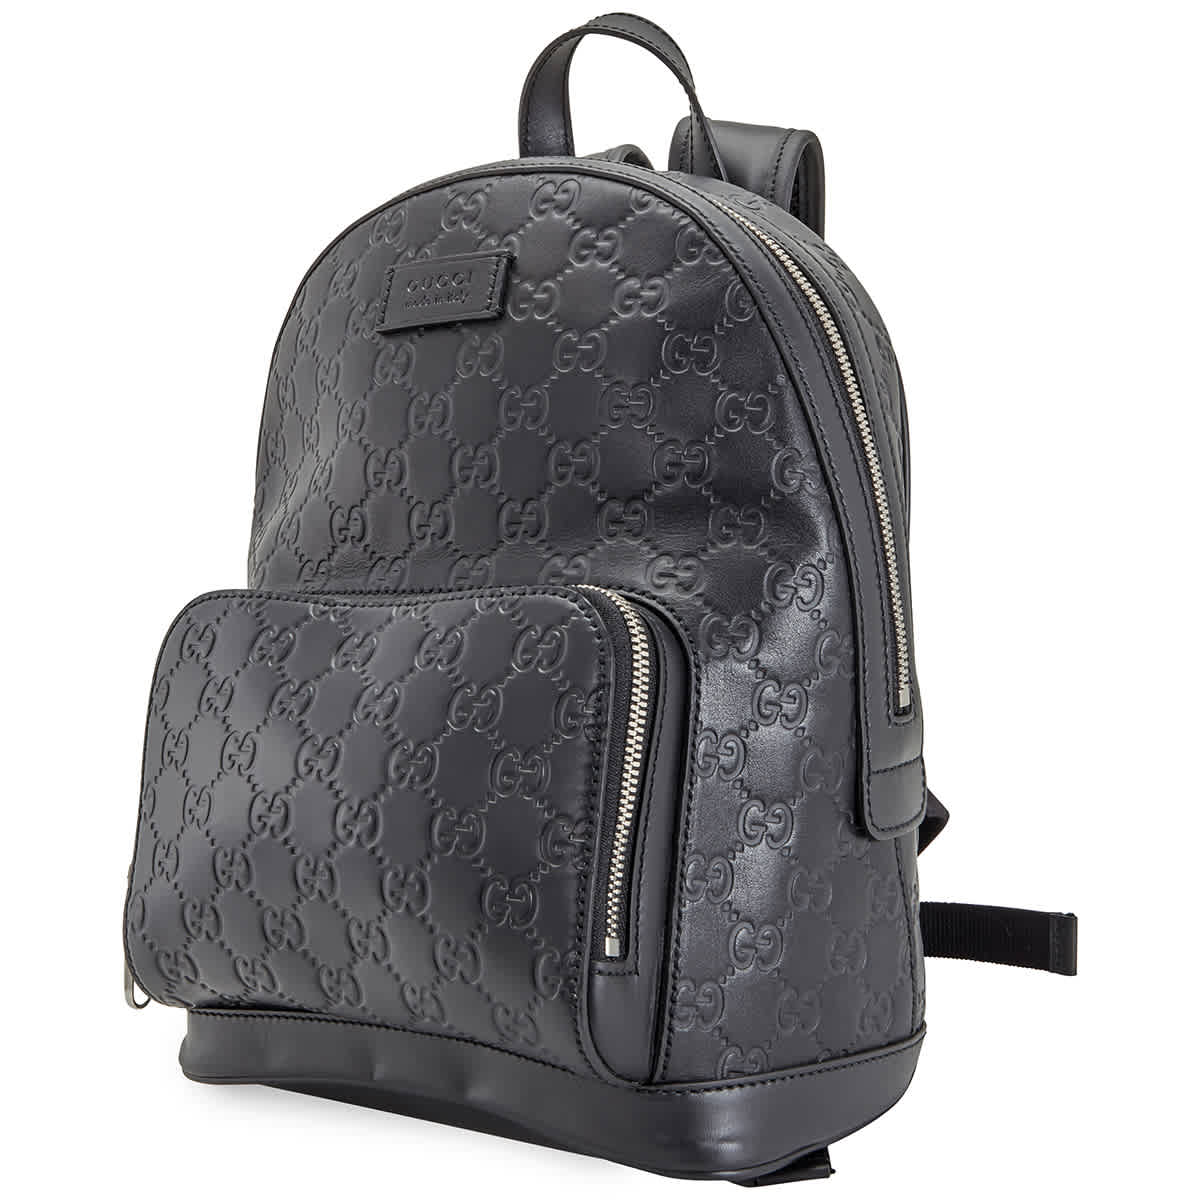 Gucci Signature Leather Backpack 450967 CWCQN 1000 | eBay